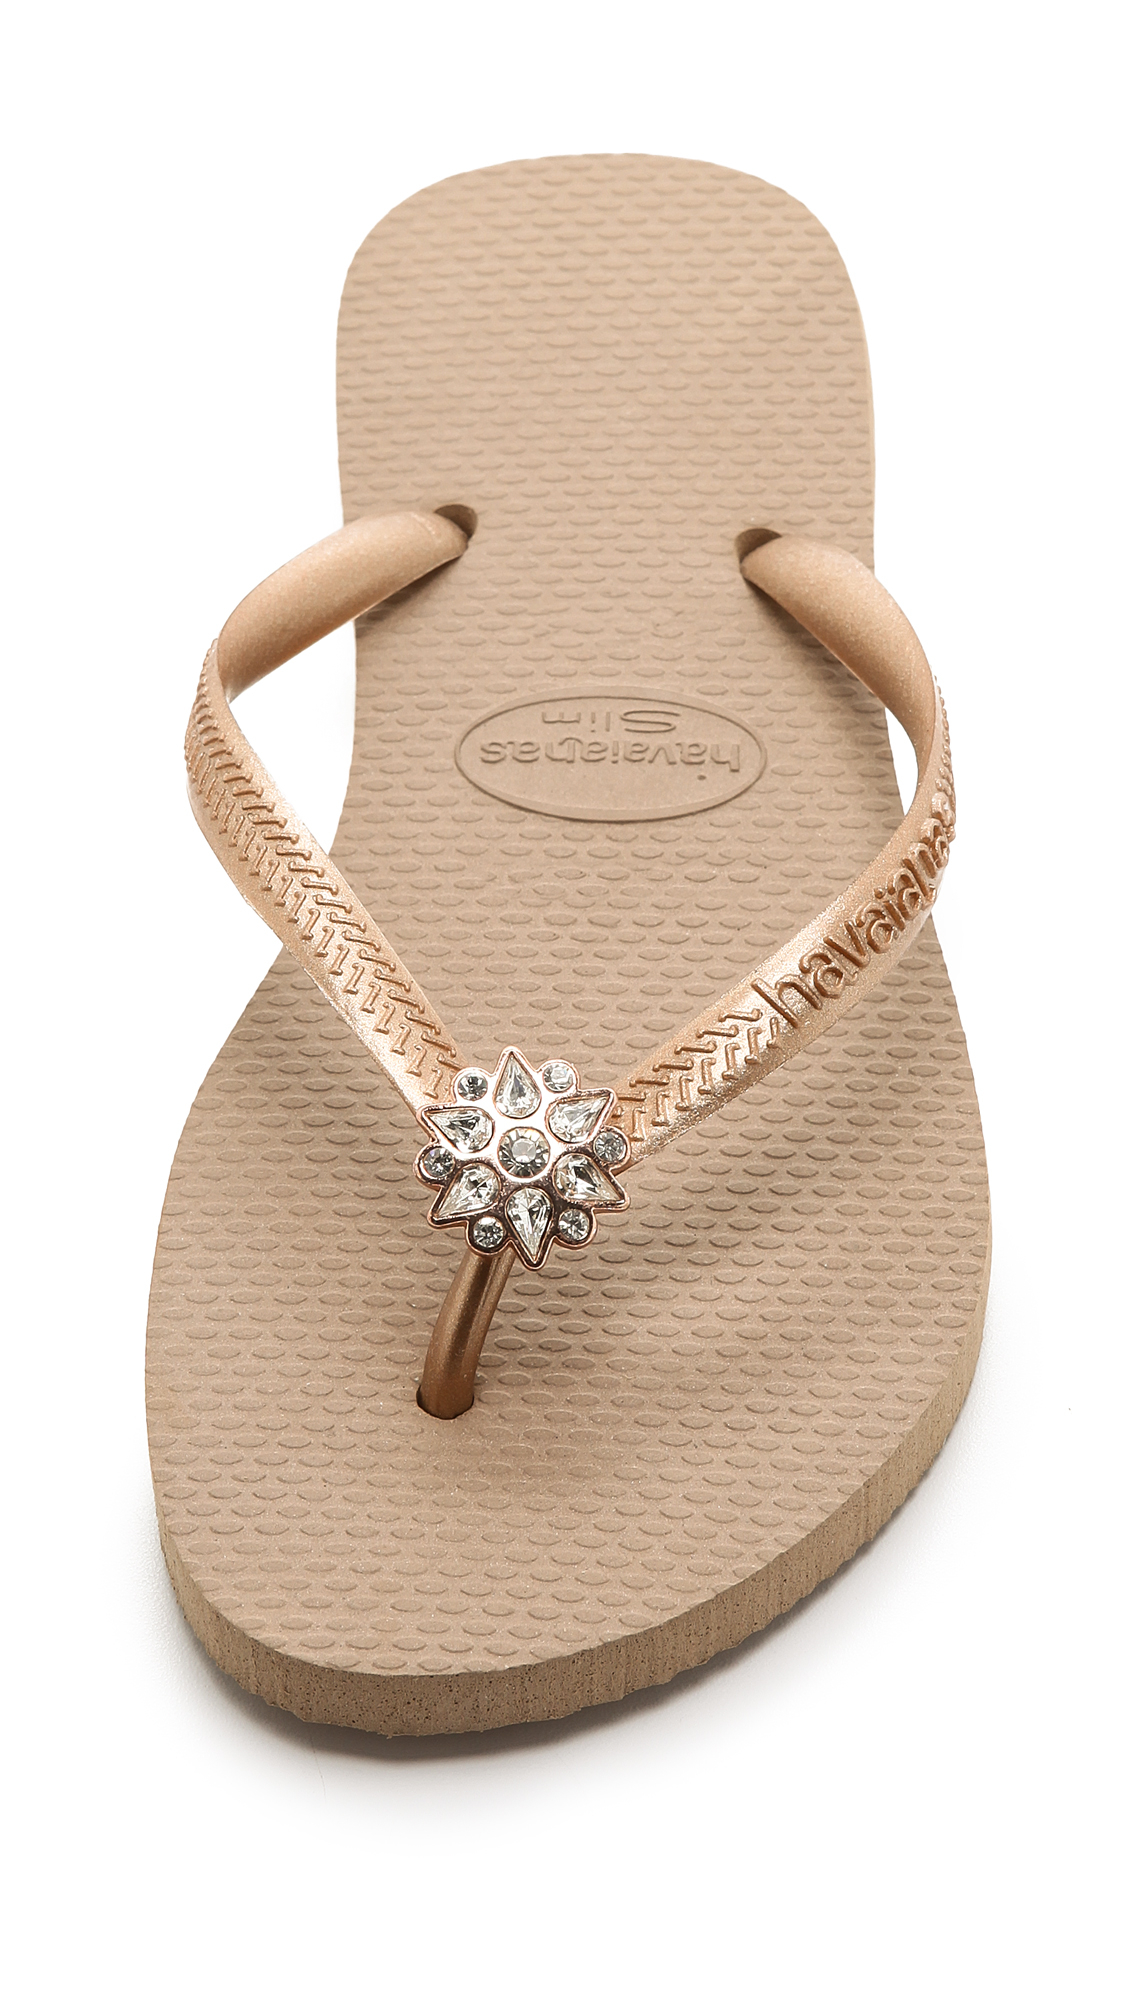 rose gold crystal havaianas